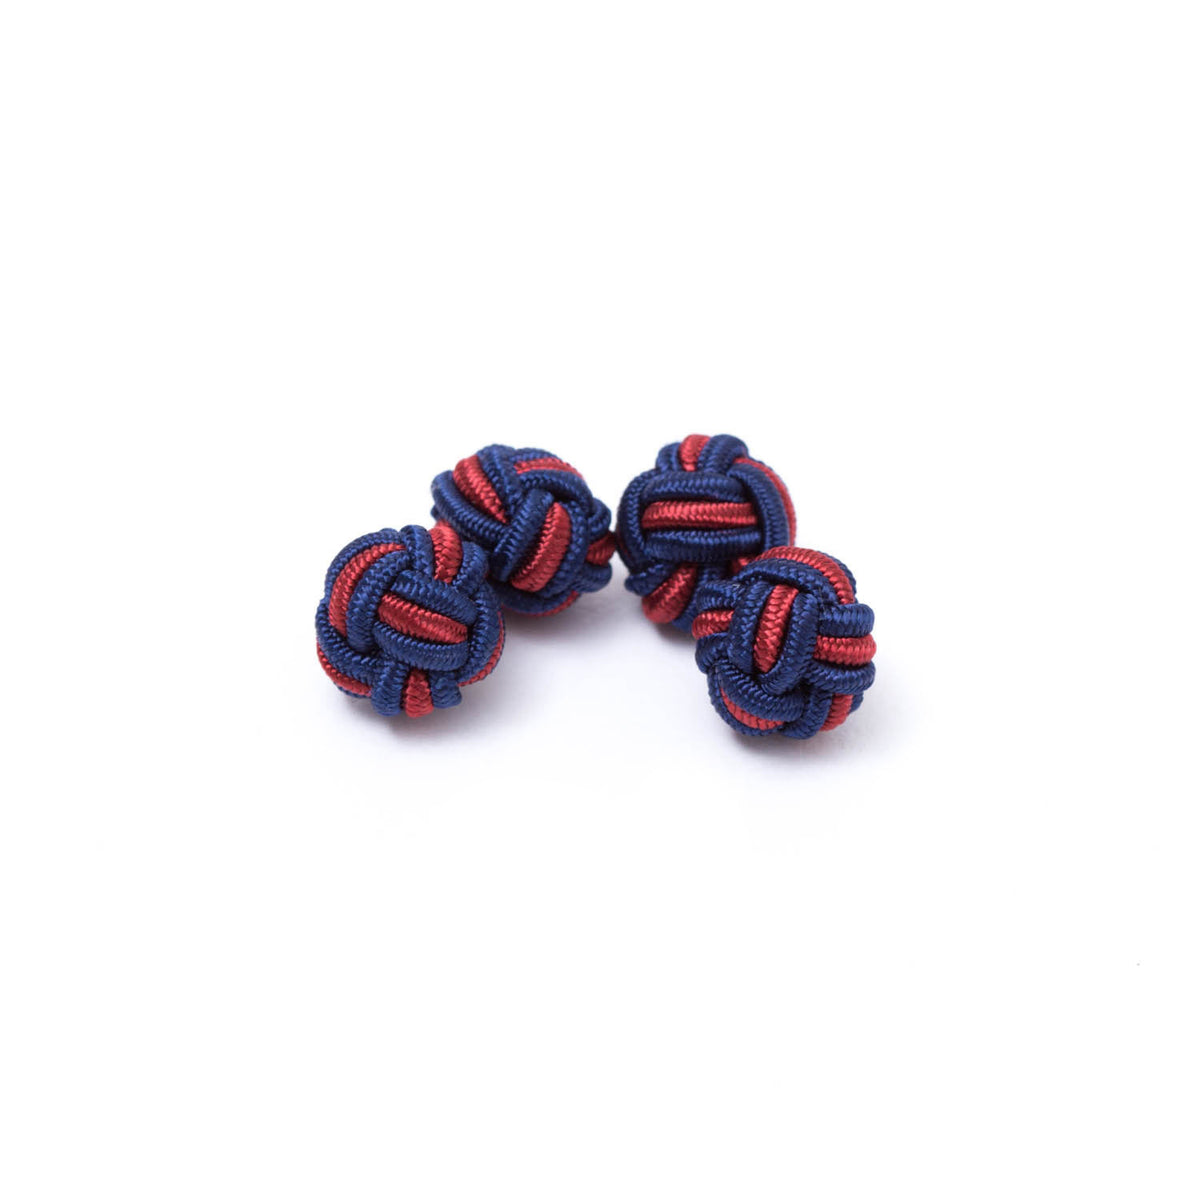 A pair of Dual Colored Knot Cufflinks, one blue and one red, on a white background from KirbyAllison.com.